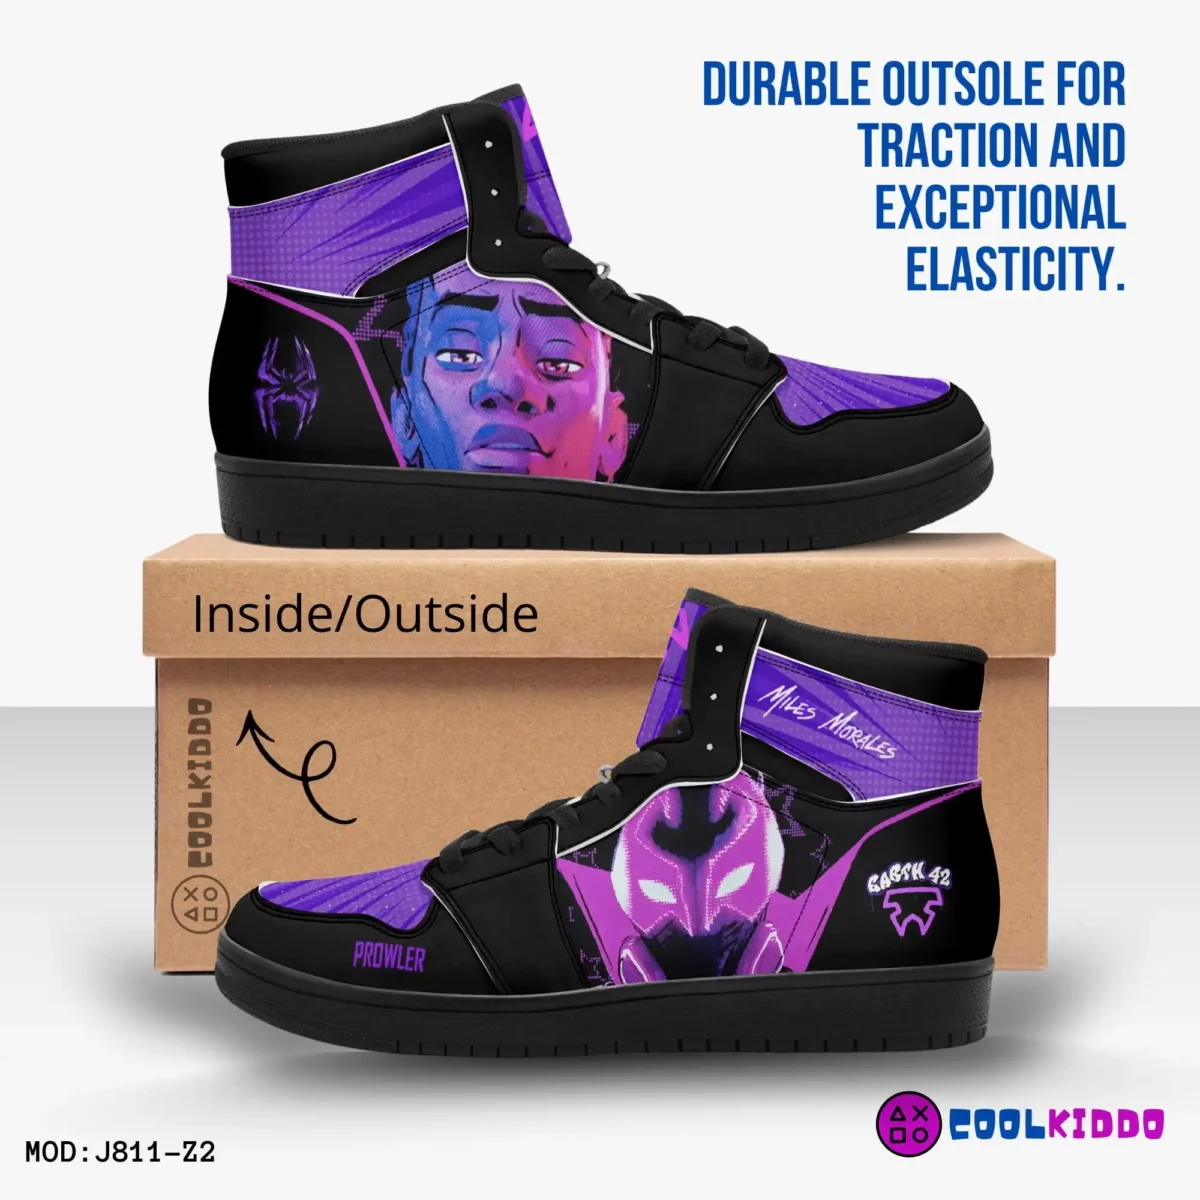 Custom Miles Morales Spiderman Shoes Spider Verse Earth 42 Prowler High-Top Leather Sneakers Cool Kiddo 14